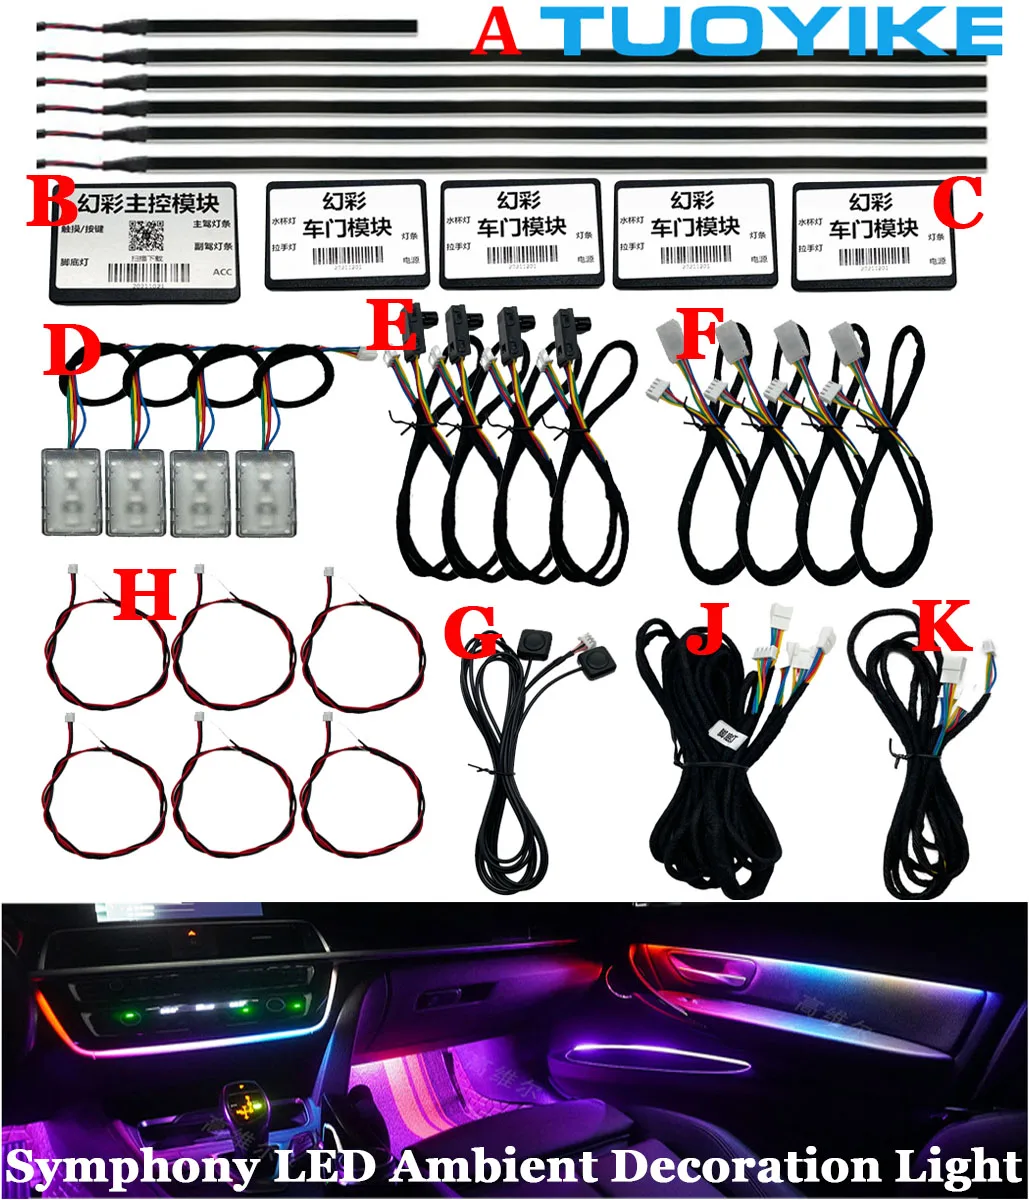 

Dual Zone 18 in 1 RGB LED Symphony Car Ambient Lights 64 Colors Interior Acrylic Lamp Guide Fiber Optic Universal Atmosphere 12V